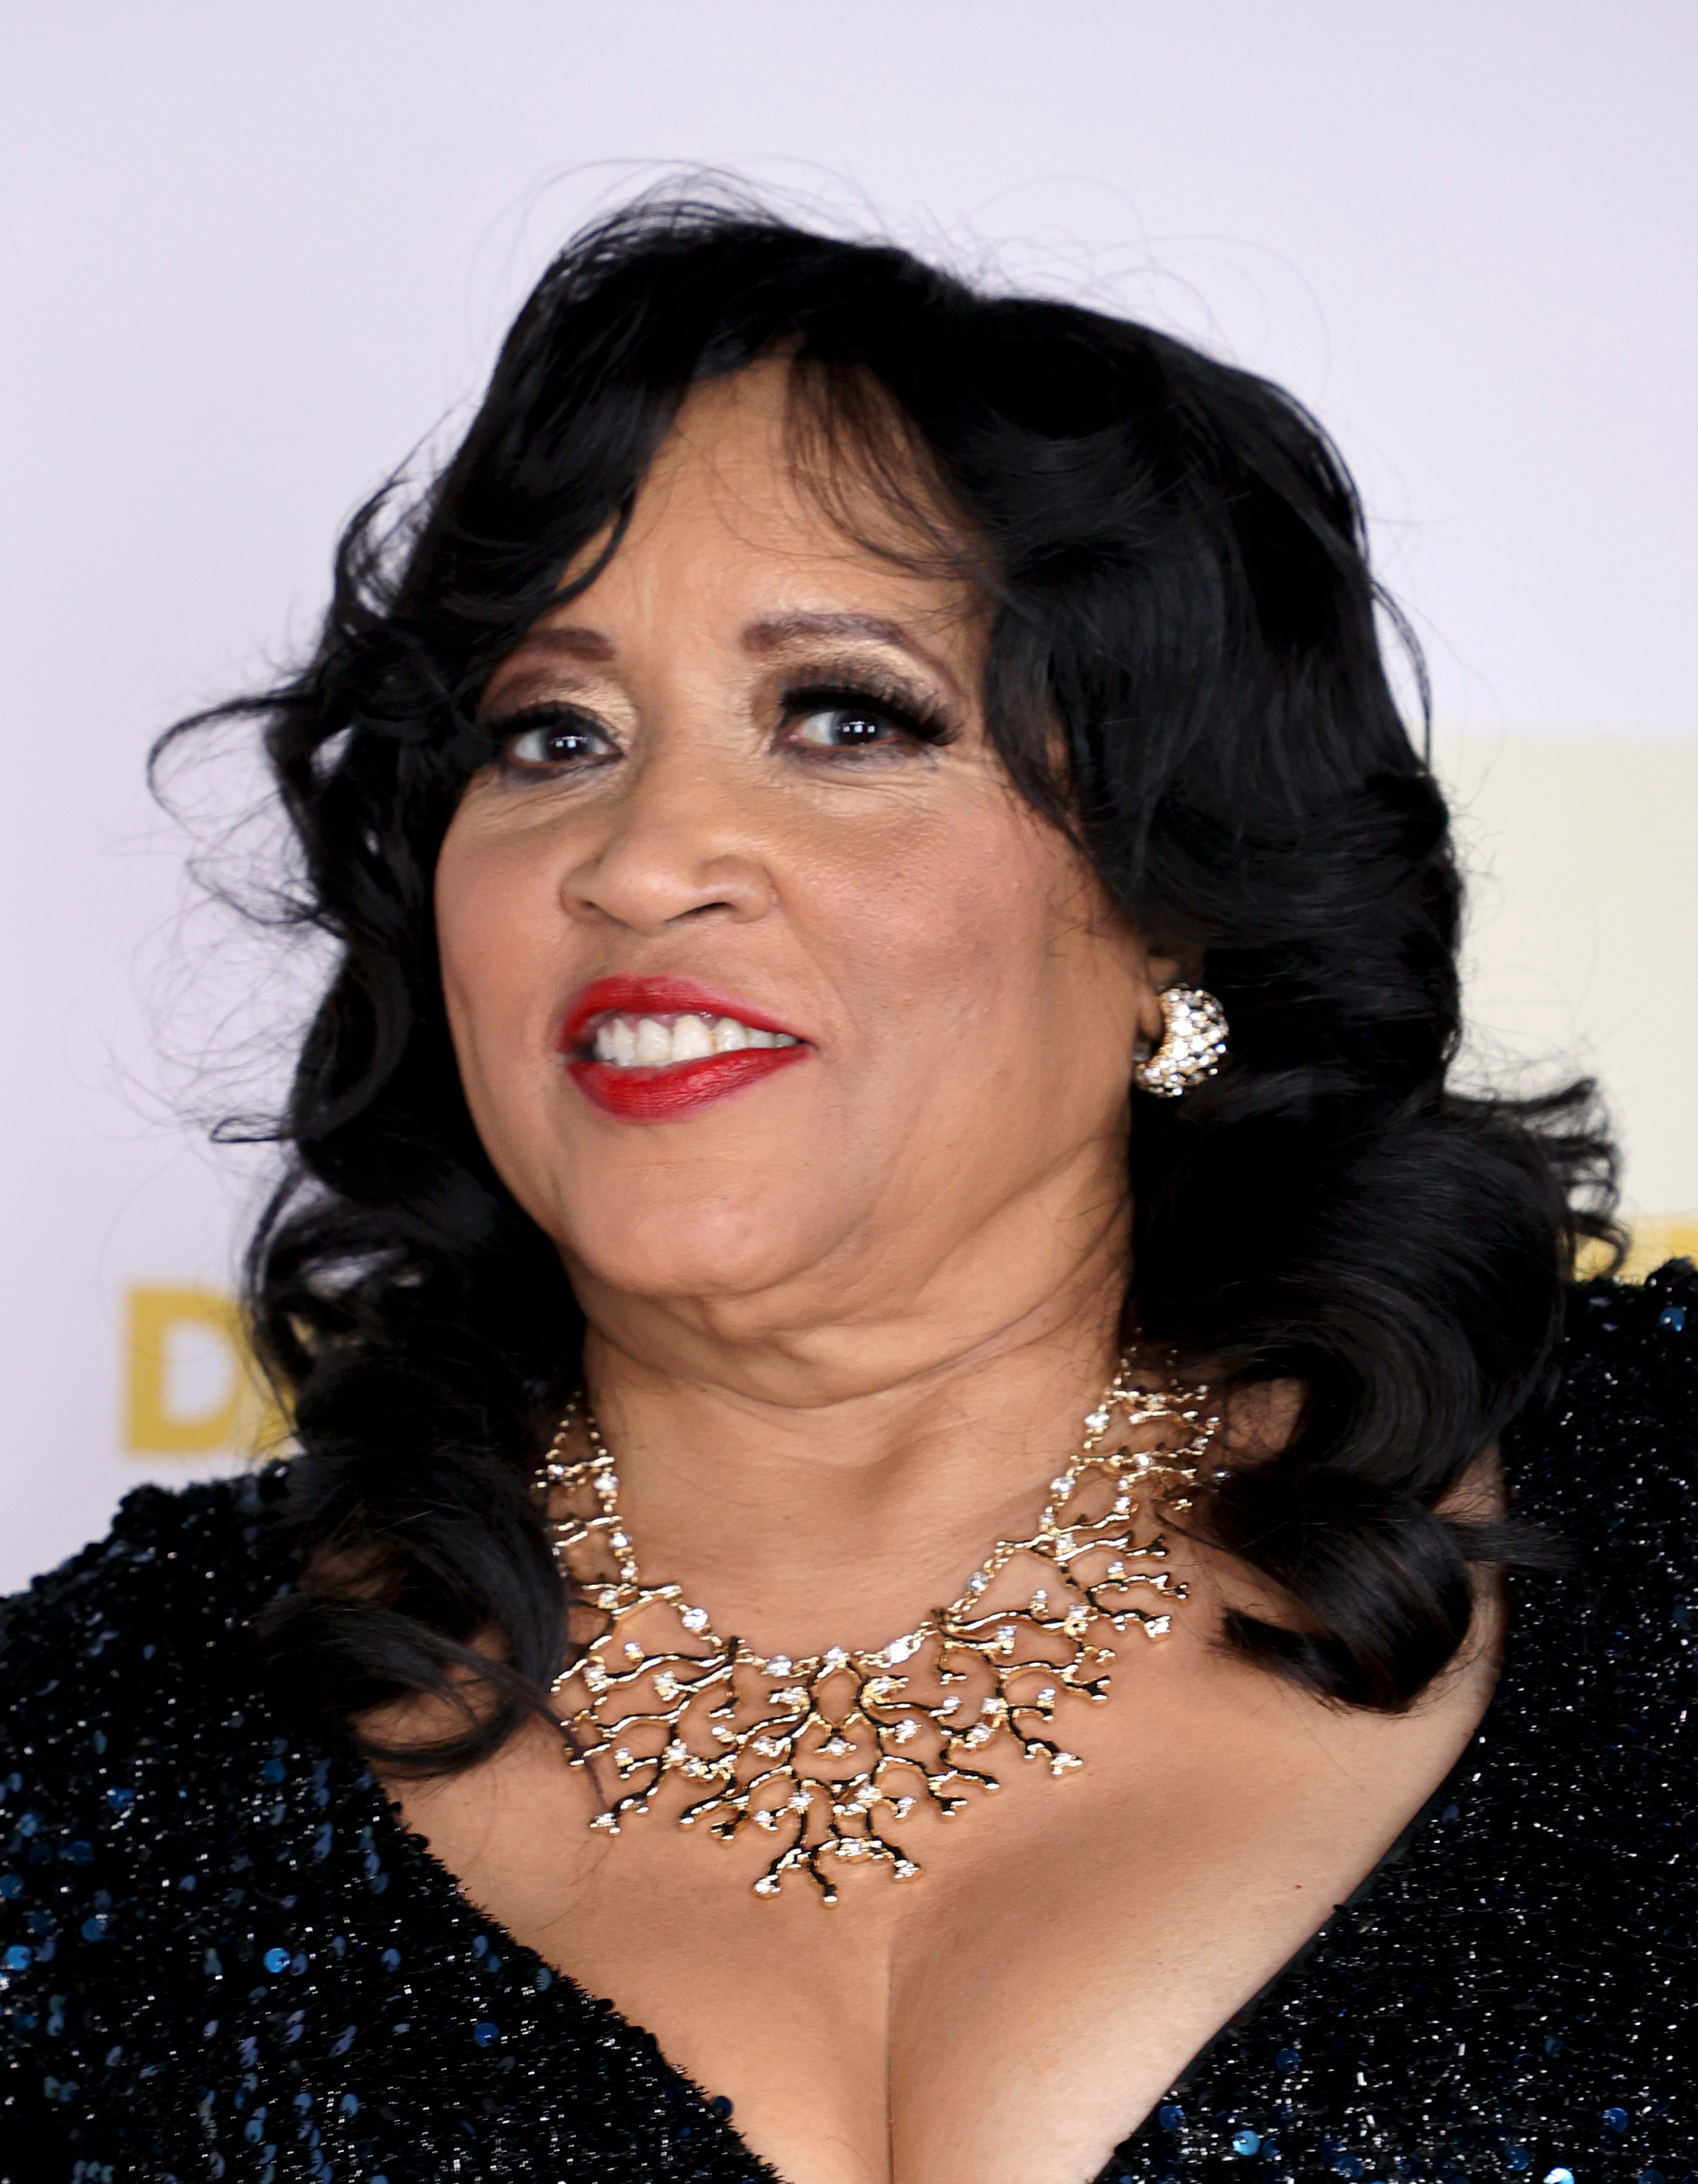 Jackée Harry poses at the 48th Annual Daytime Emmy Awards